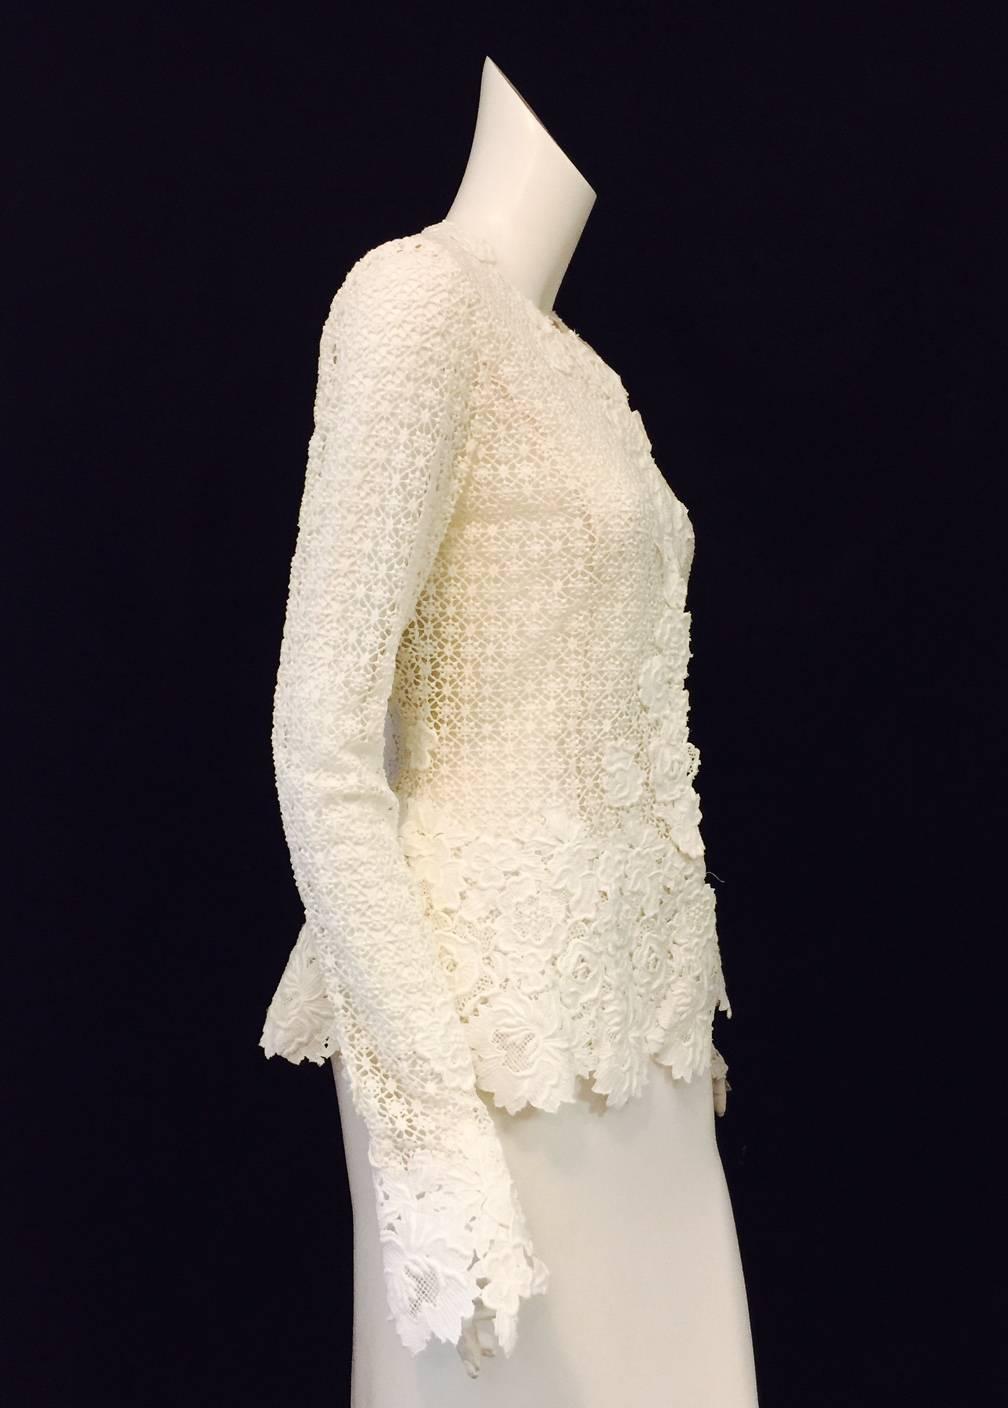 Oscar de la Renta Ivory Crochet Jacket is unabashedly feminine, dramatic and chic!  Collarless design features fitted silhouette, elongated sleeves, and 6 hidden snap closure.  Finished with dramatic floral applique at neckline, hem and sleeve